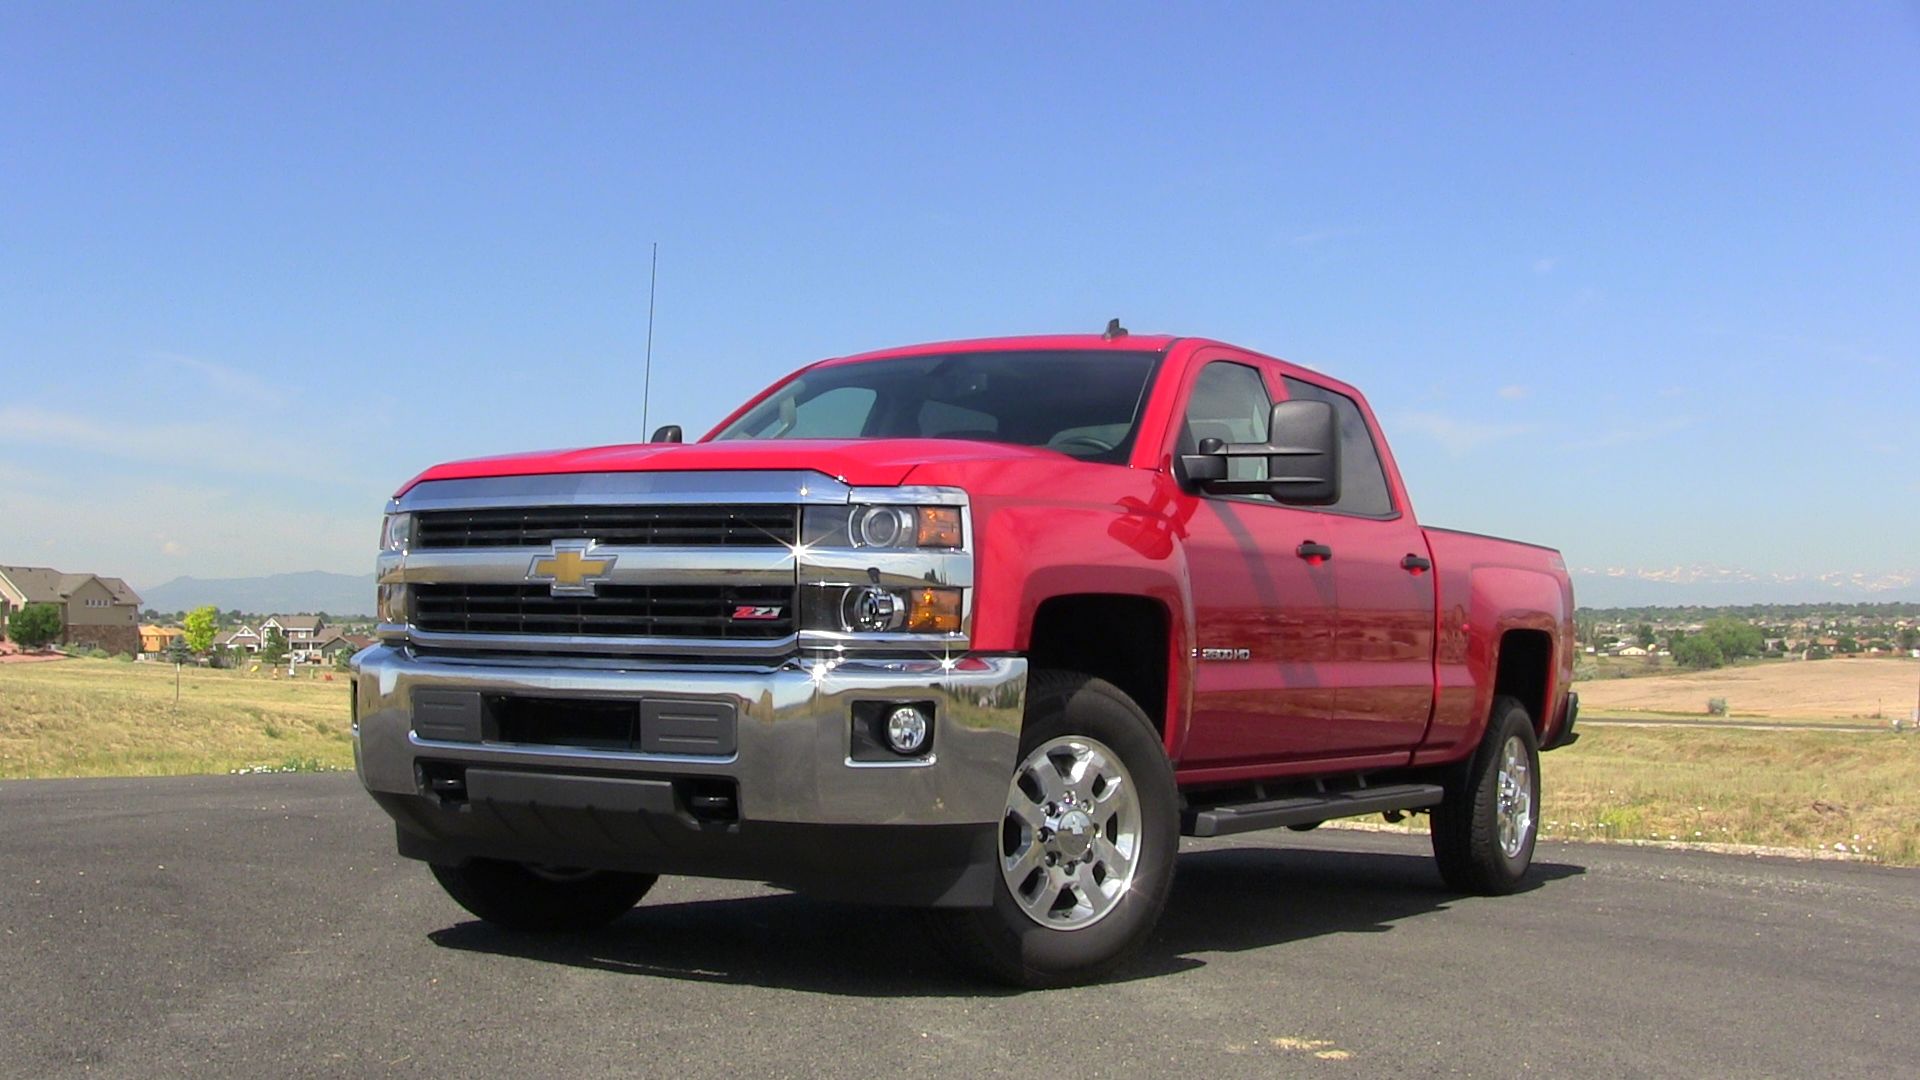 2015 Chevy Silverado 2500 HD 6.0L - Quiet Worker [Review] - The Fast